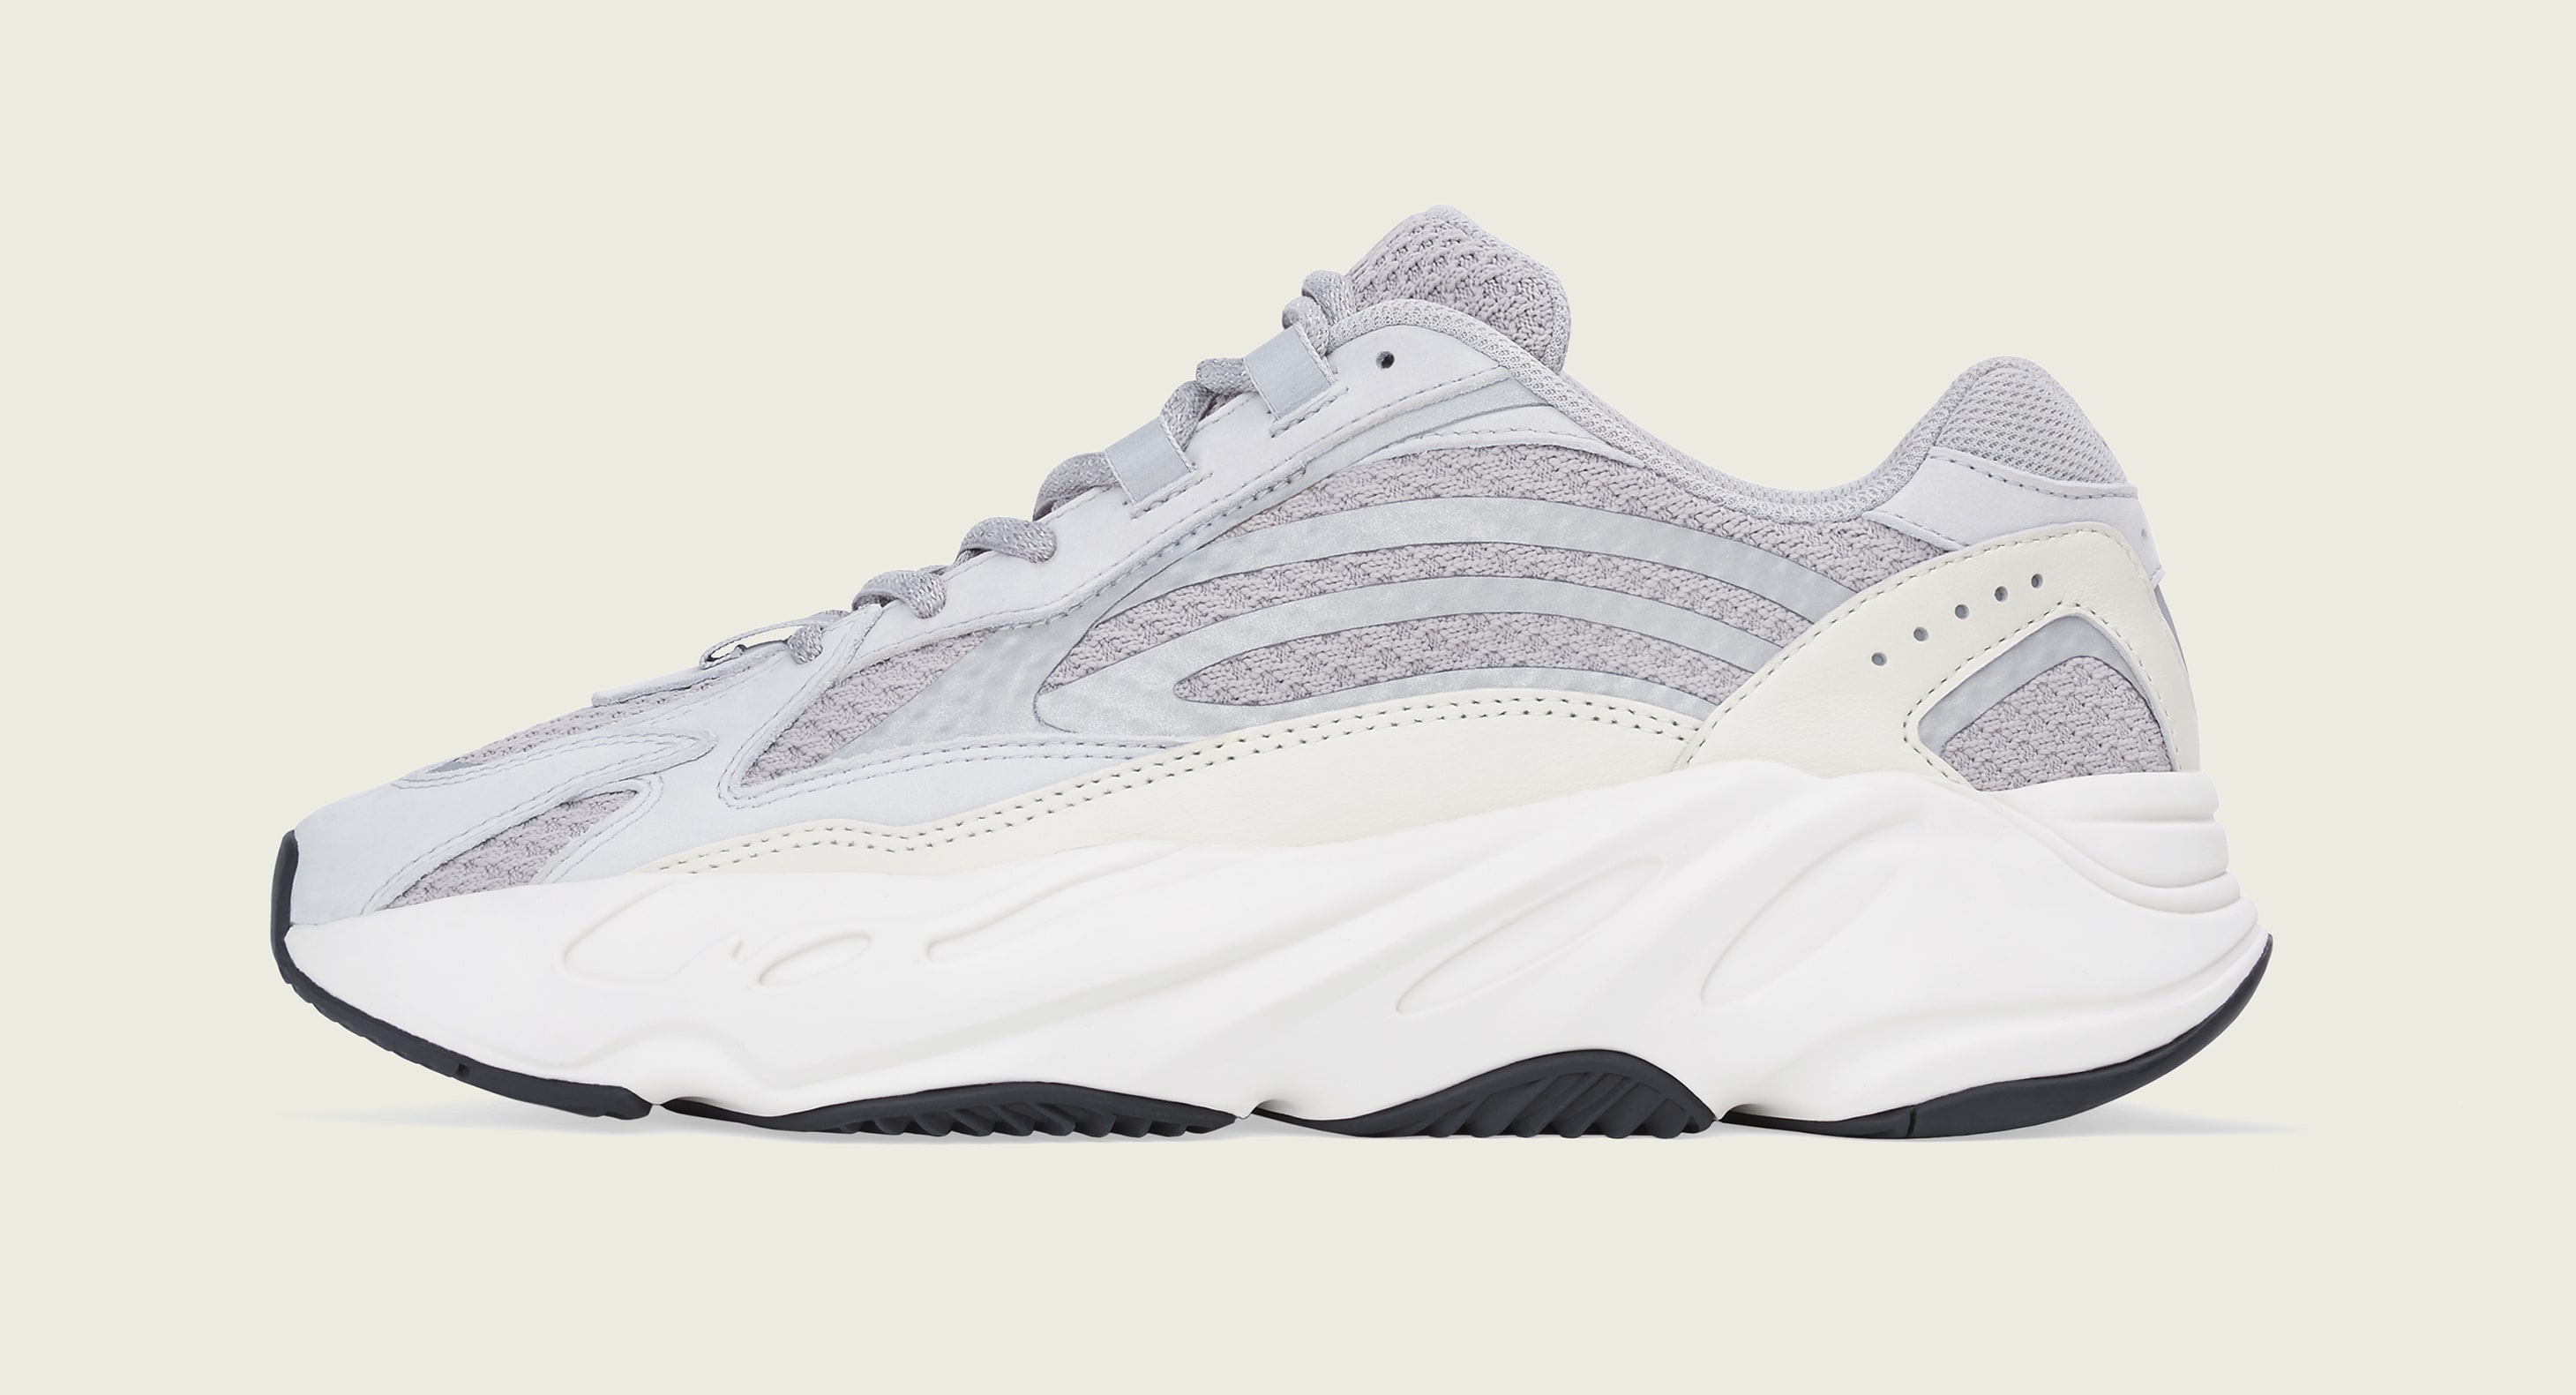 Adidas Yeezy Boost 700 V2 'Static' EF2829 (Lateral)